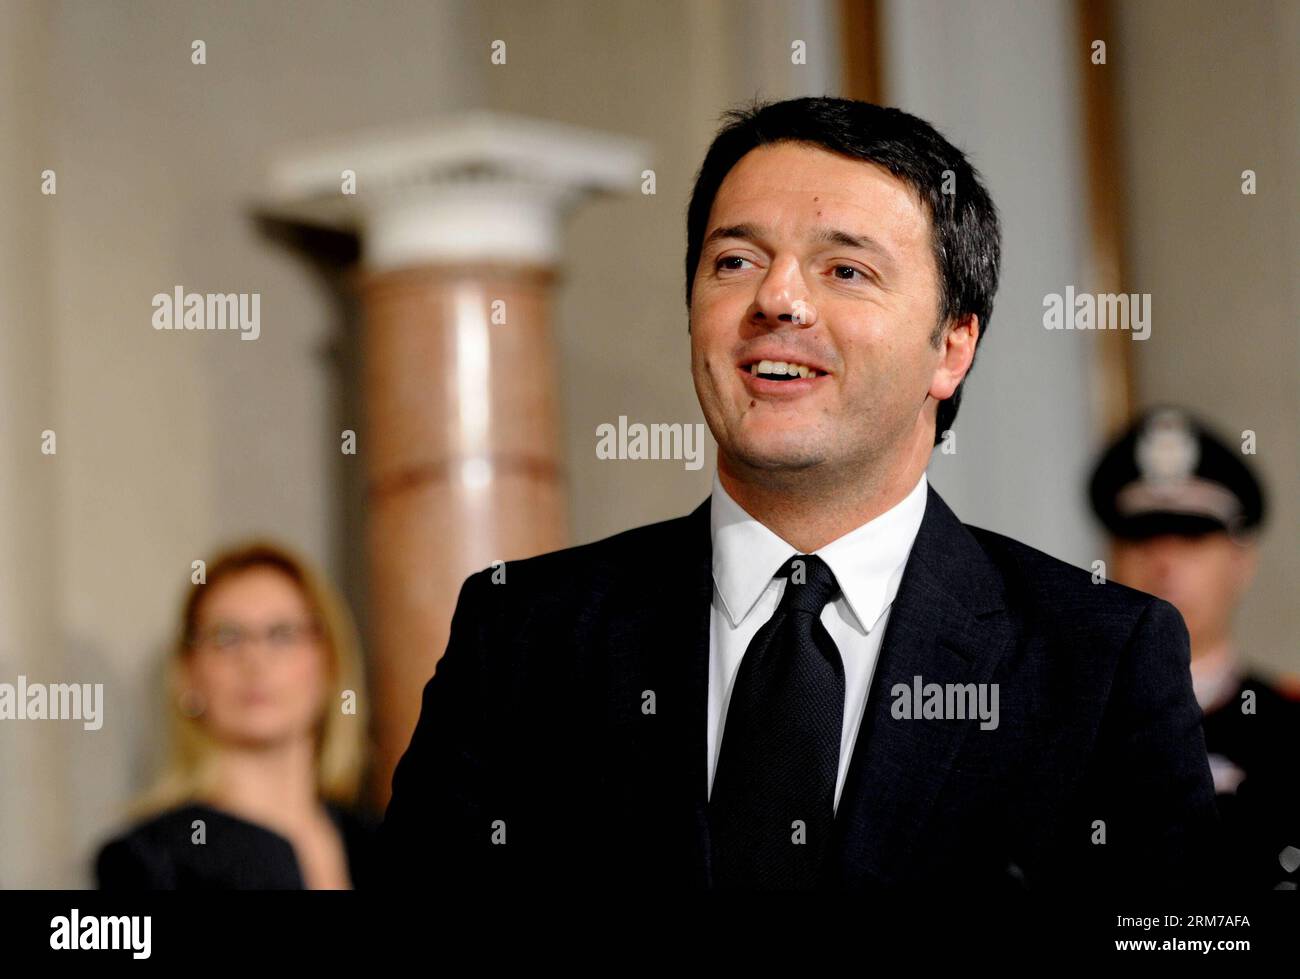 (140221) -- ROME, Feb. 21, 2014 (Xinhua) -- Newly appointed Italian Prime Minister Matteo Renzi speaks during a press conference after talking with Italian President Giorgio Napolitano in Quirinale Palace in Rome, Italy, on Feb. 21, 2014. After three days of consultations and reflection, Italy s center-left leader Matteo Renzi on Friday formally accepted the position of prime minister and presented his cabinet list to President Giorgio Napolitano. (Xinhua/Xu Nizhi) ITALY-ROME-RENZI-NEW CABINET-SETTING UP PUBLICATIONxNOTxINxCHN   Rome Feb 21 2014 XINHUA newly Appointed Italian Prime Ministers M Stock Photo